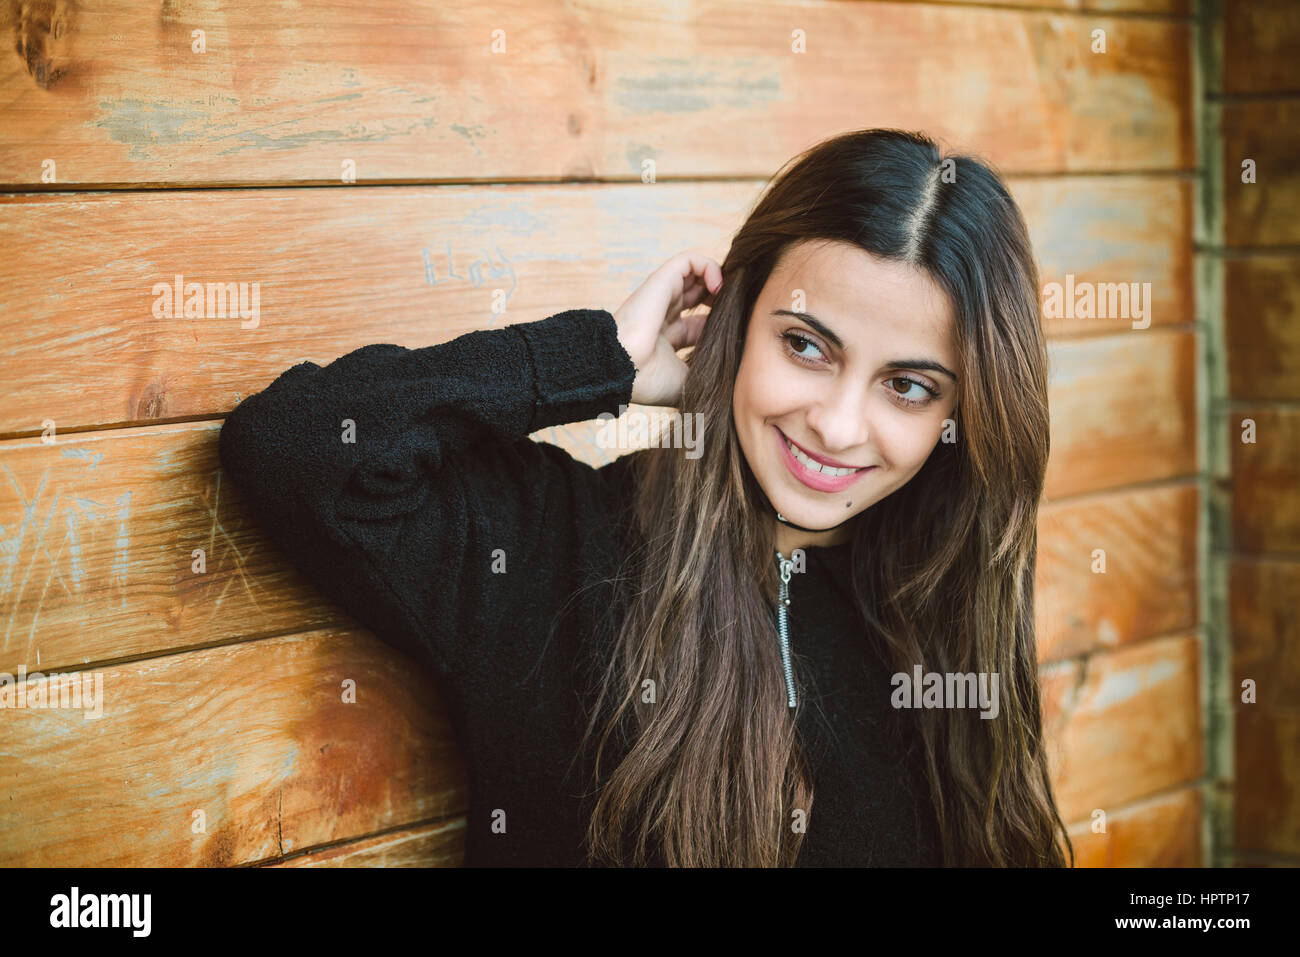 Portrait of smiling young woman in front of wooden wall watching something Stock Photo